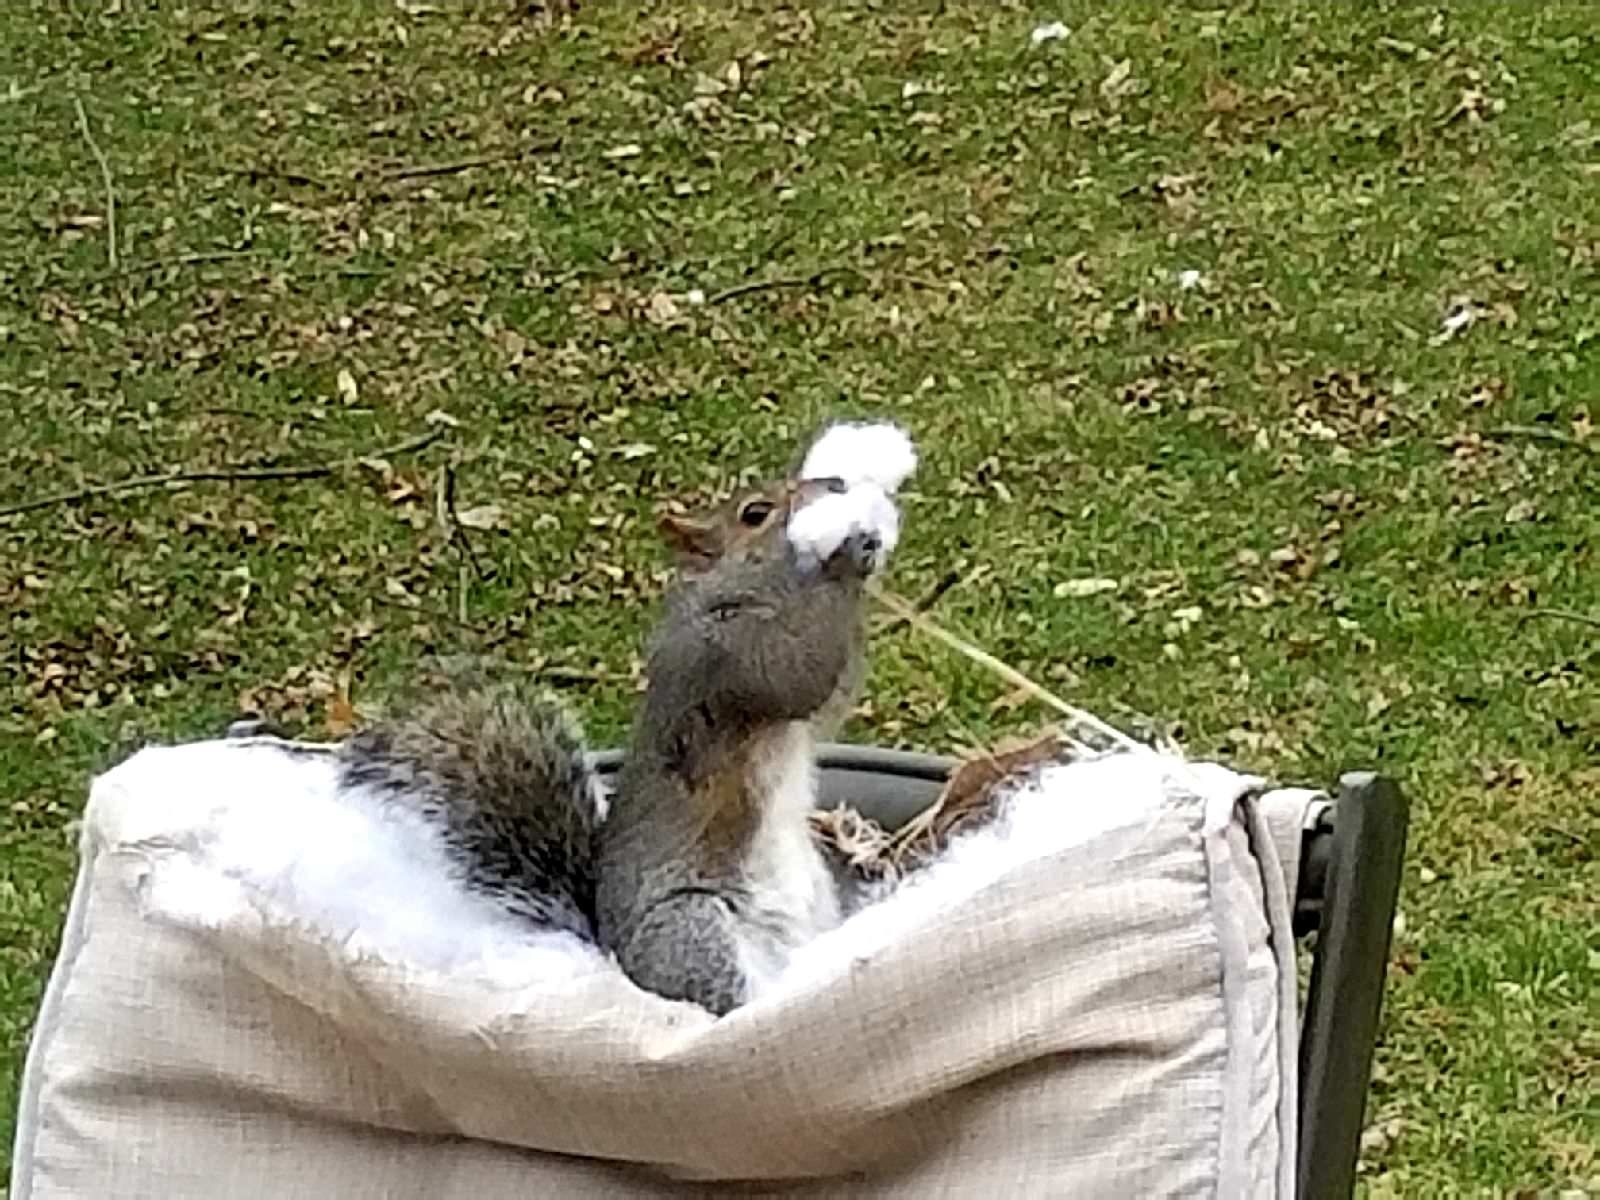 Buddy sent me this pic saying he finally figured out what was destroying his patio furniture